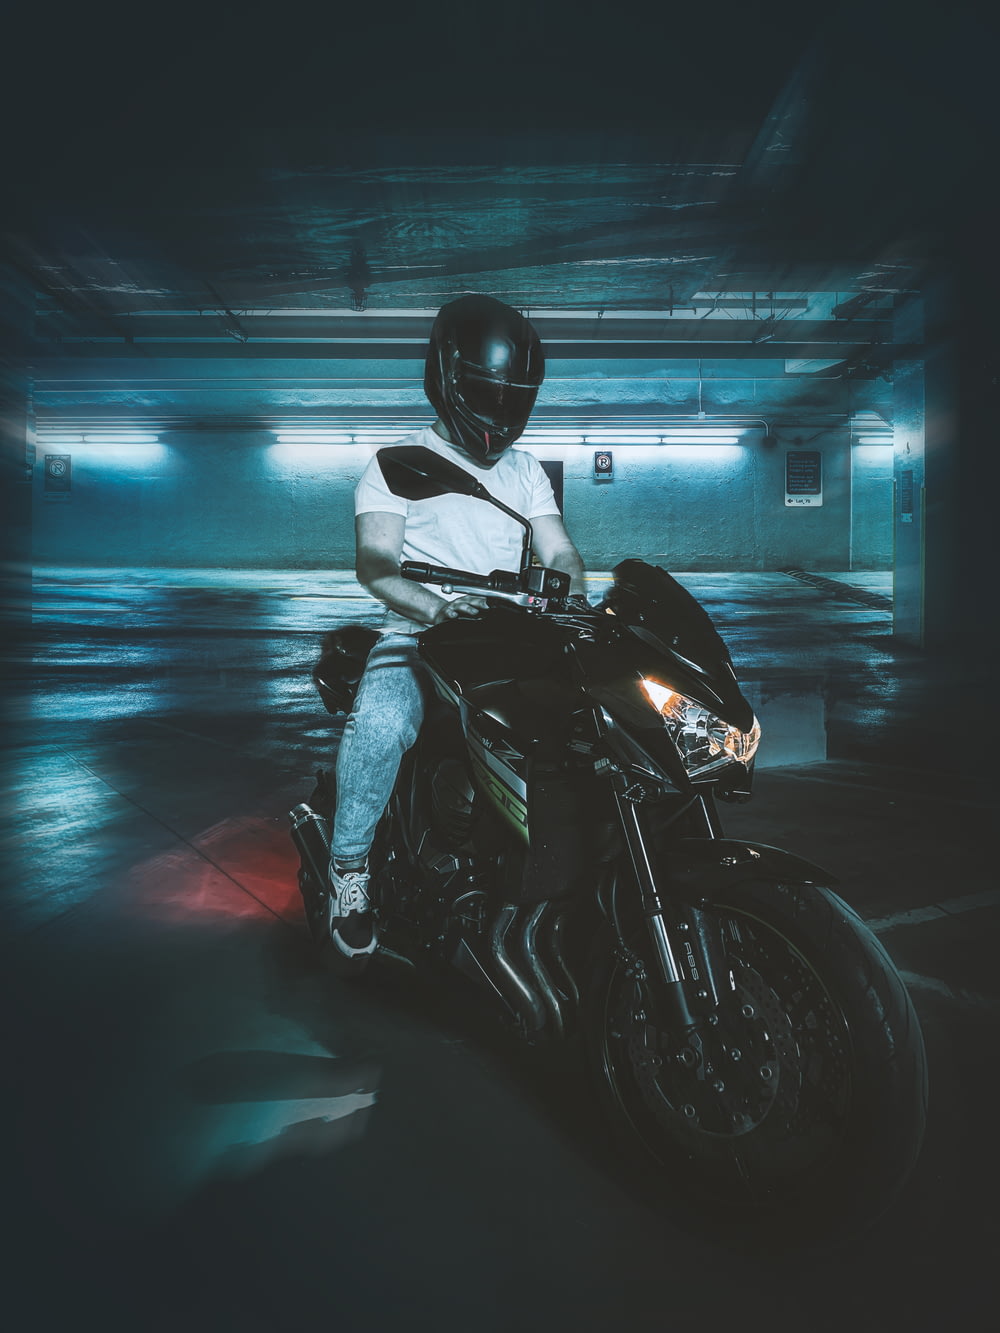 a person sitting on a motorcycle in a parking garage